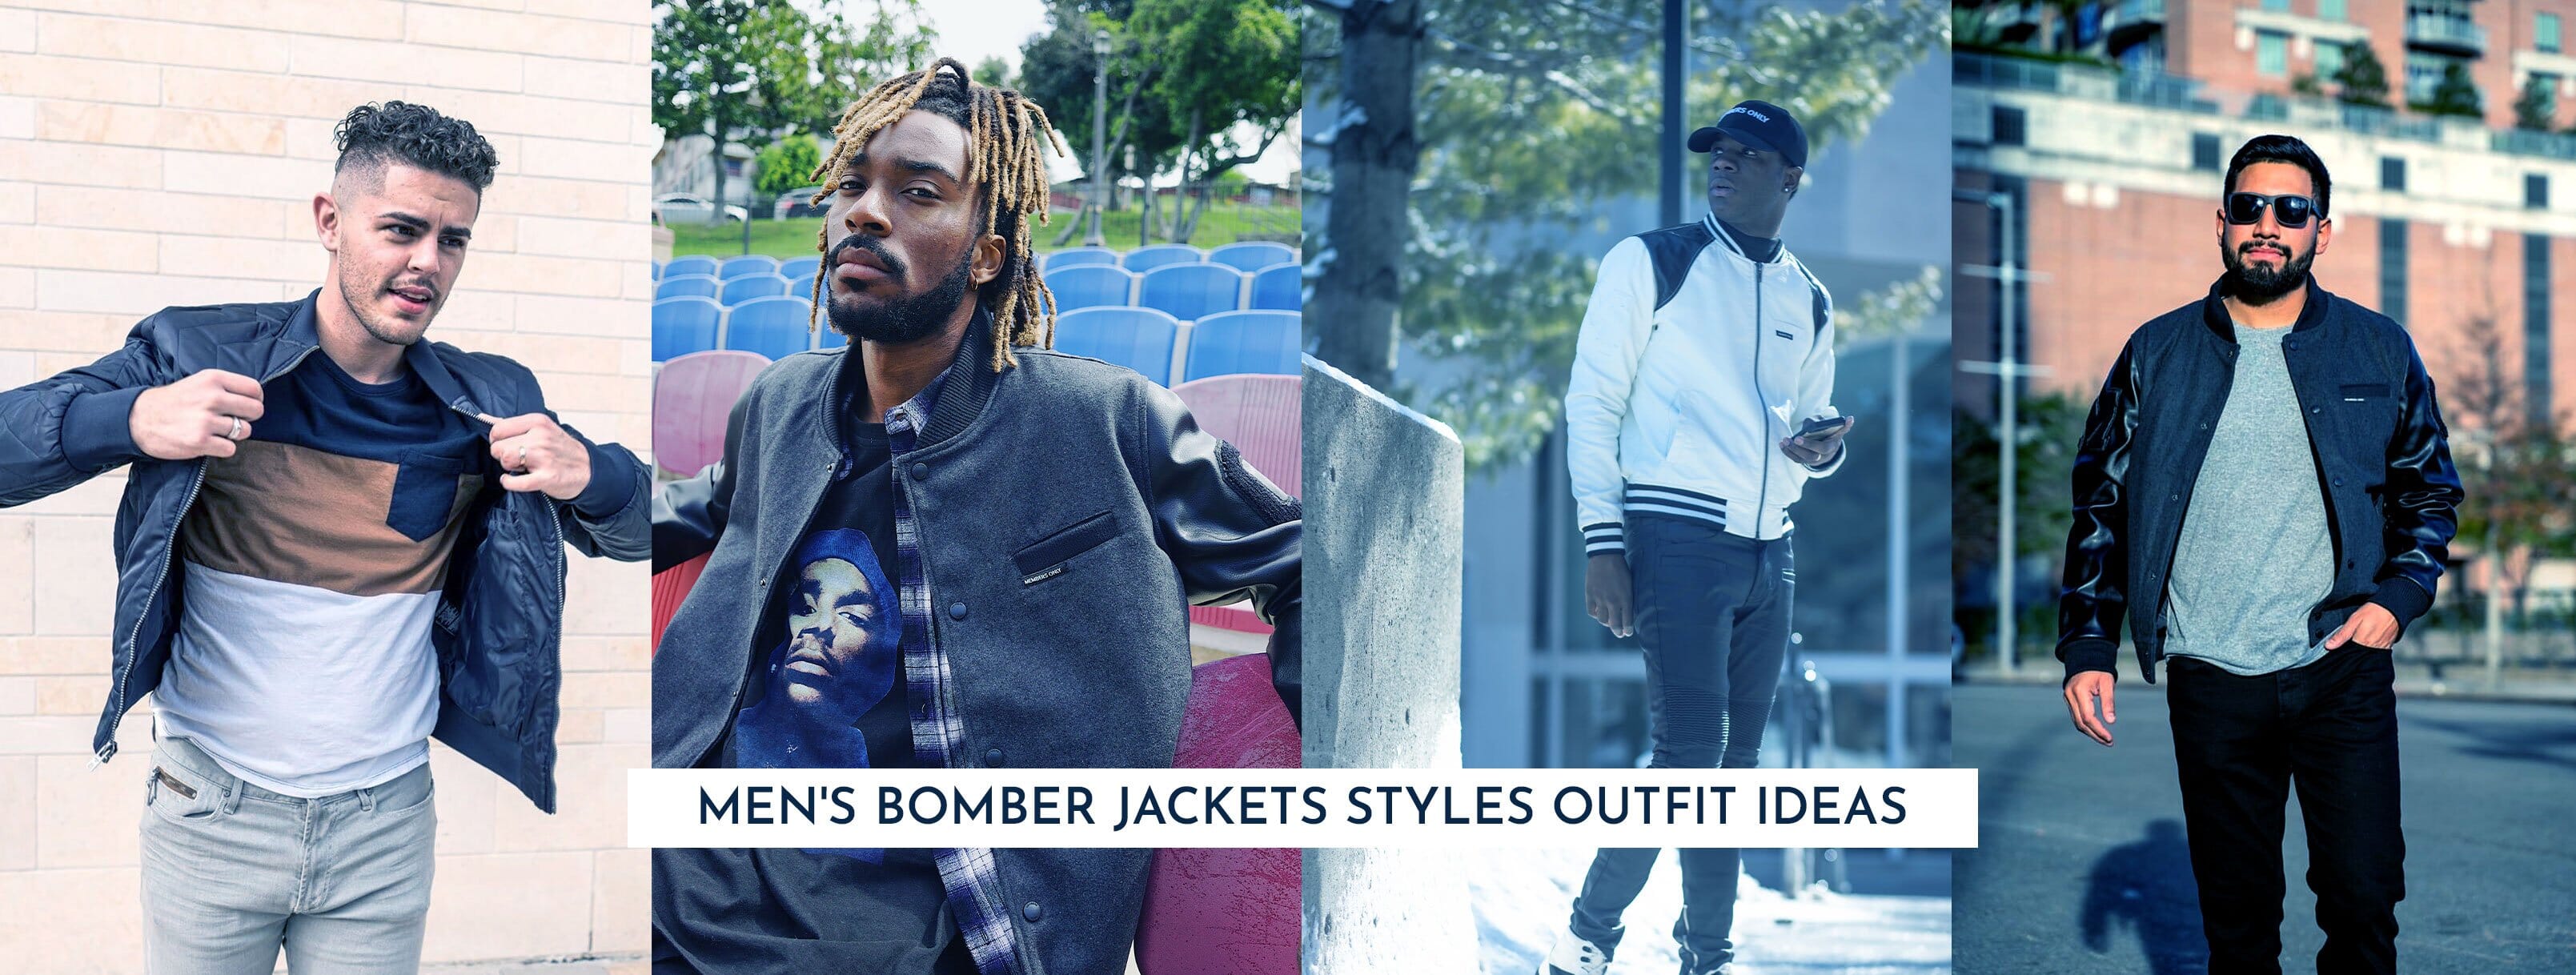 Men's Bomber Jackets Styles Outfit Ideas